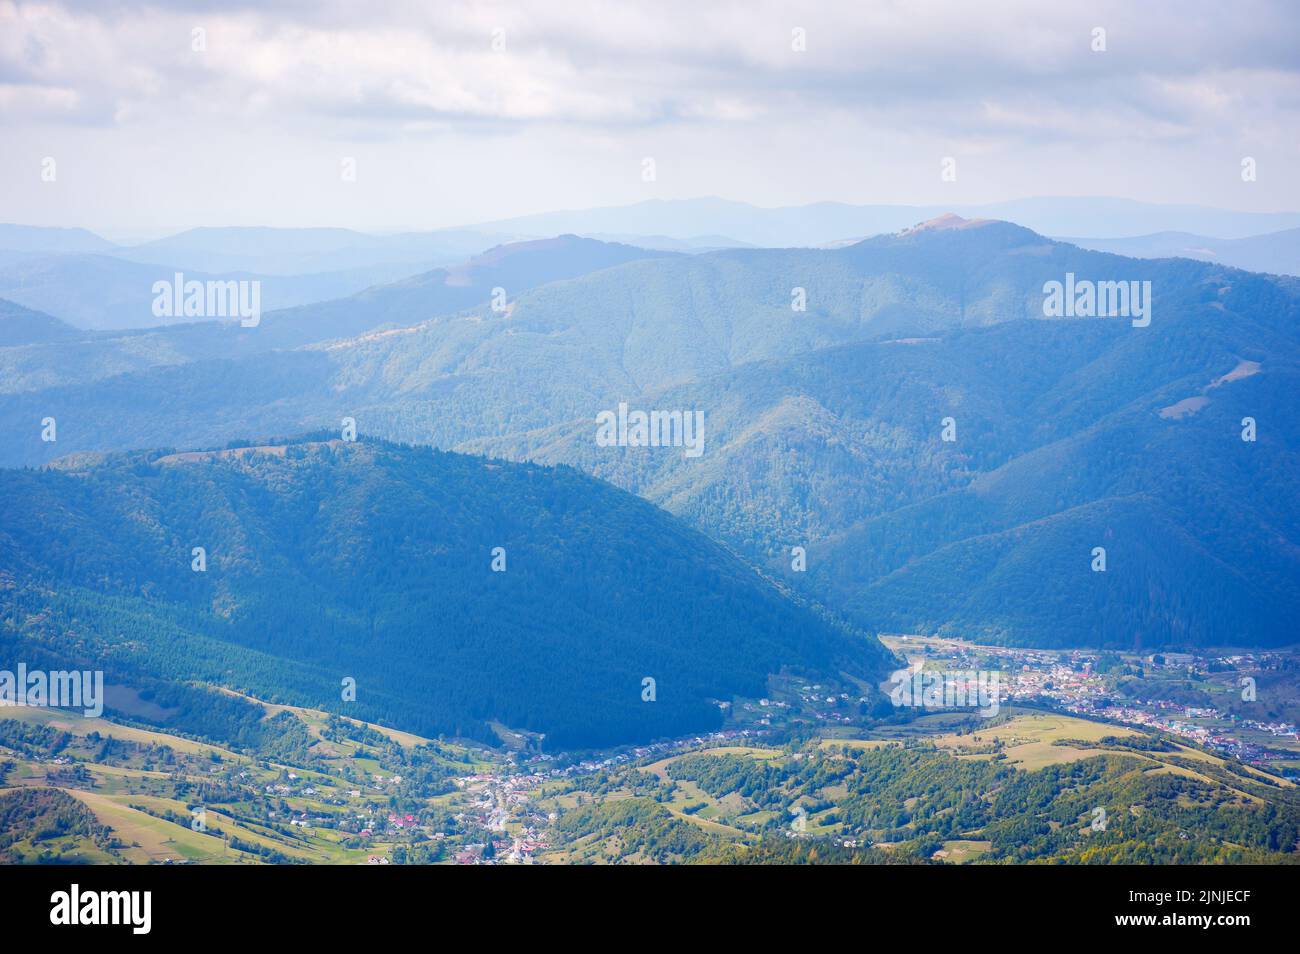 mountainous rural landscape of transcarpathia. kolochava village down in the valley observed from the top of a hill. distant ridge beneath a cloudy sk Stock Photo